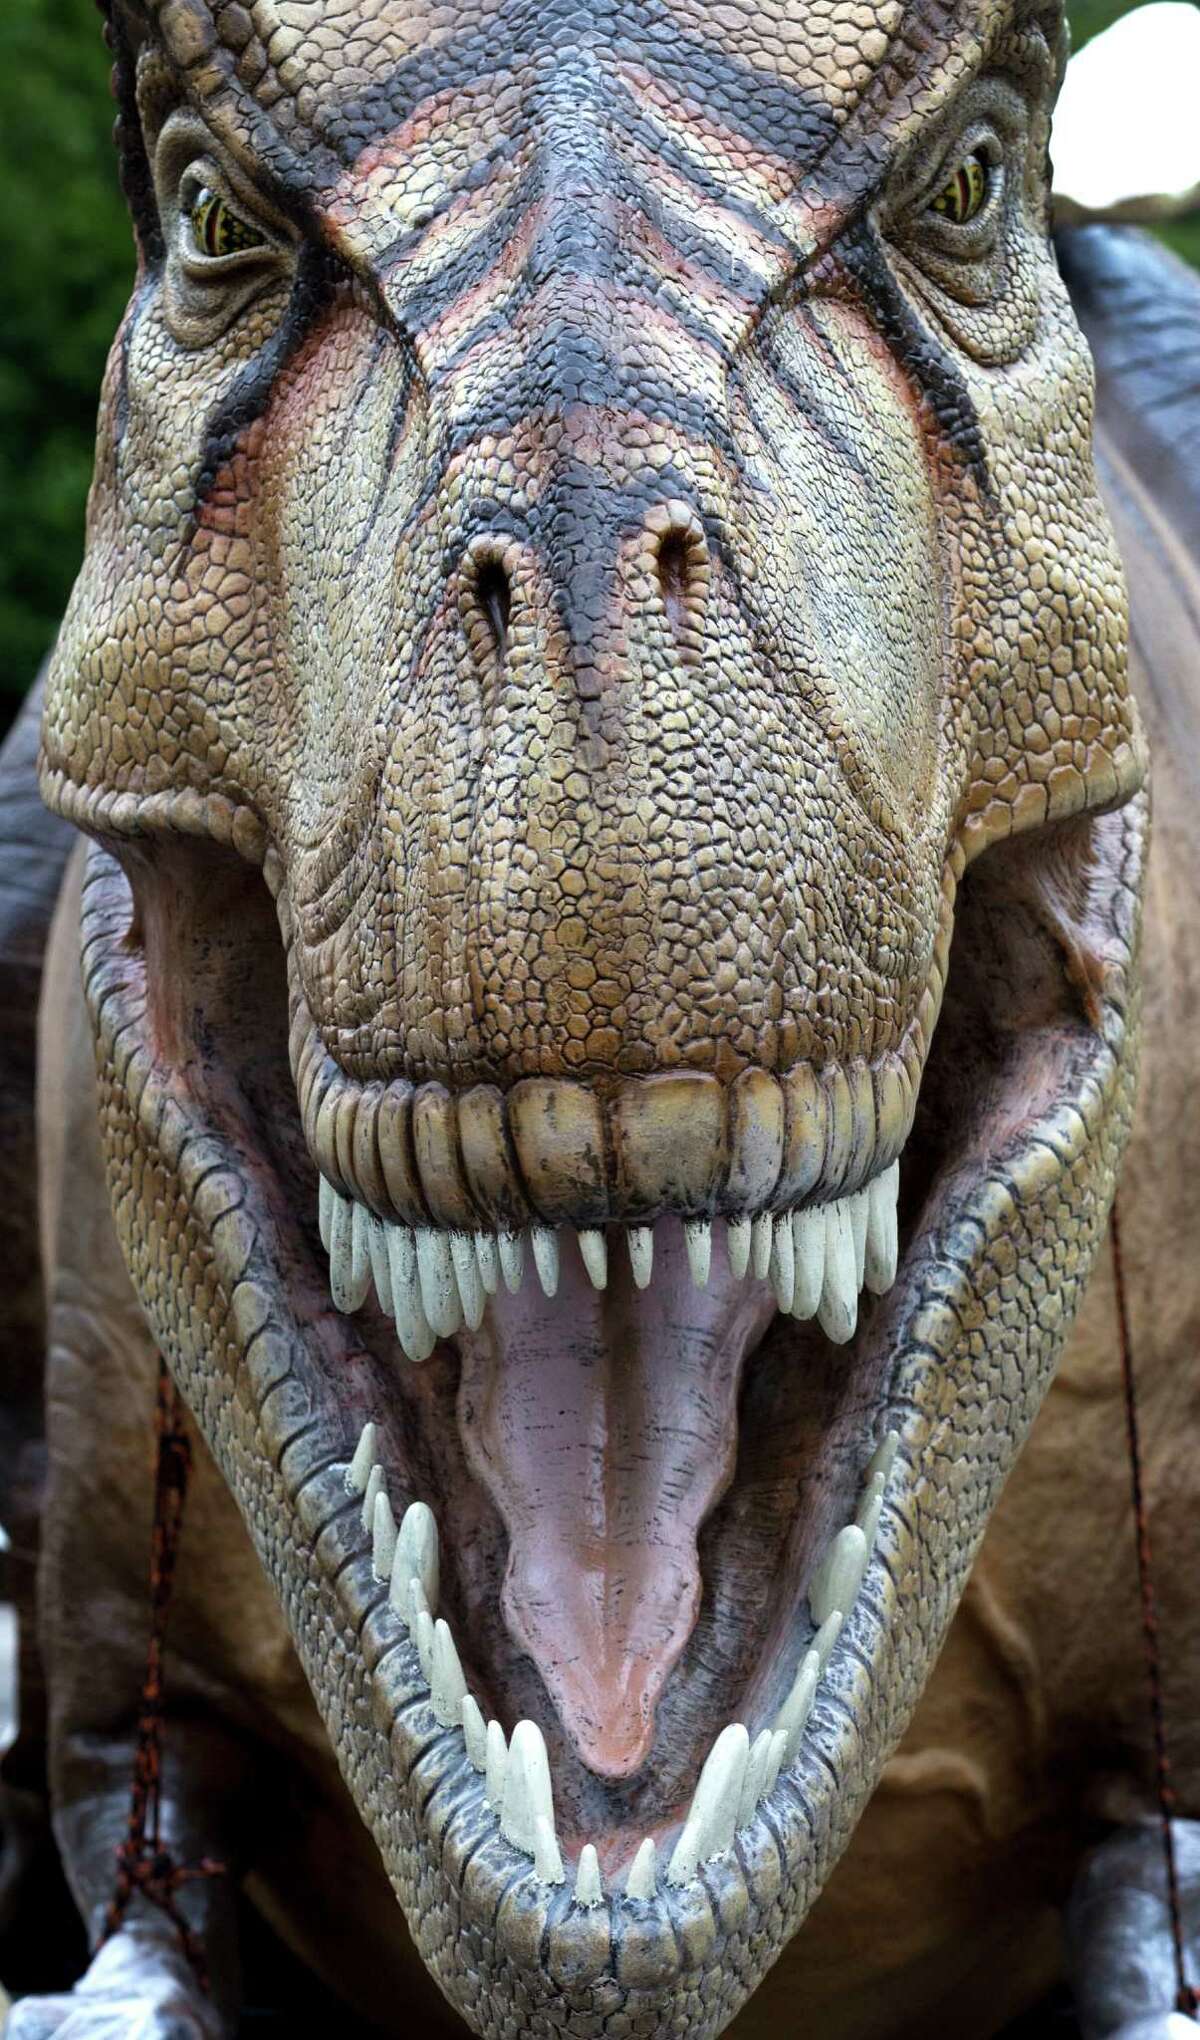 The face of a Tyrannosaurus Rex is seen during the unloading of more than a dozen animatronic dinosaurs in preparation for 'Orkin presents DINOSAURS! at the Houston Zoo' Monday, April 16, 2012, in Houston. The exhibit is scheduled to open May 4. DINOSAURS! debuted at the Houston Zoo in 2010 and drew more than 800,000 people from Memorial Day to the end of October. This time around, the exhibit will feature 18 dinosaurs, including the return of the popular T-Rex. All the dinosaurs on display are ones that lived in Texas, said Brian Hill, zoo spokesman.